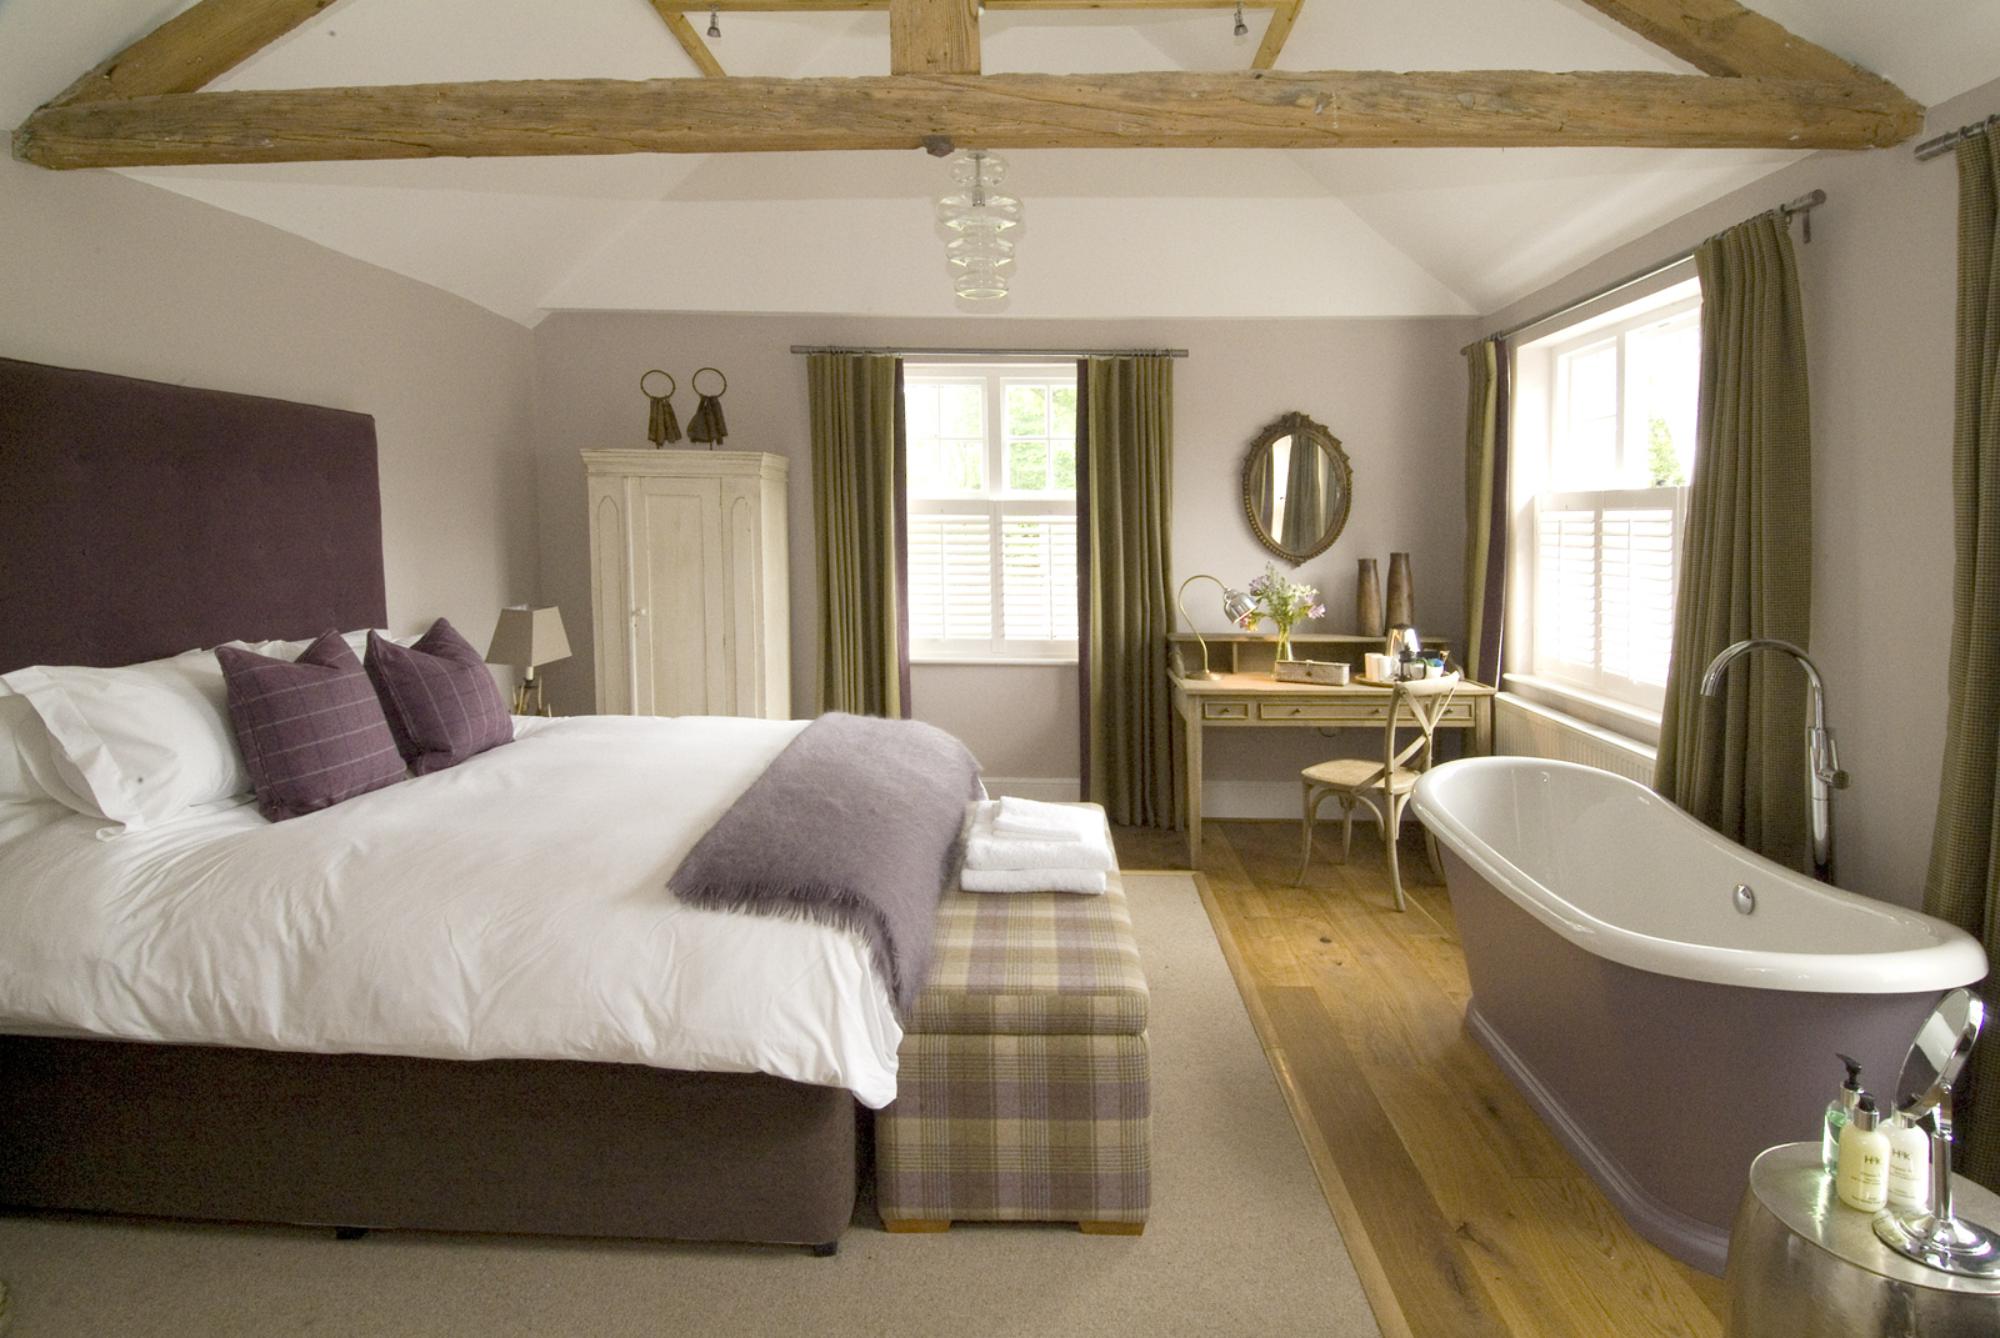 Hotels in South East England holidays at Cool Places